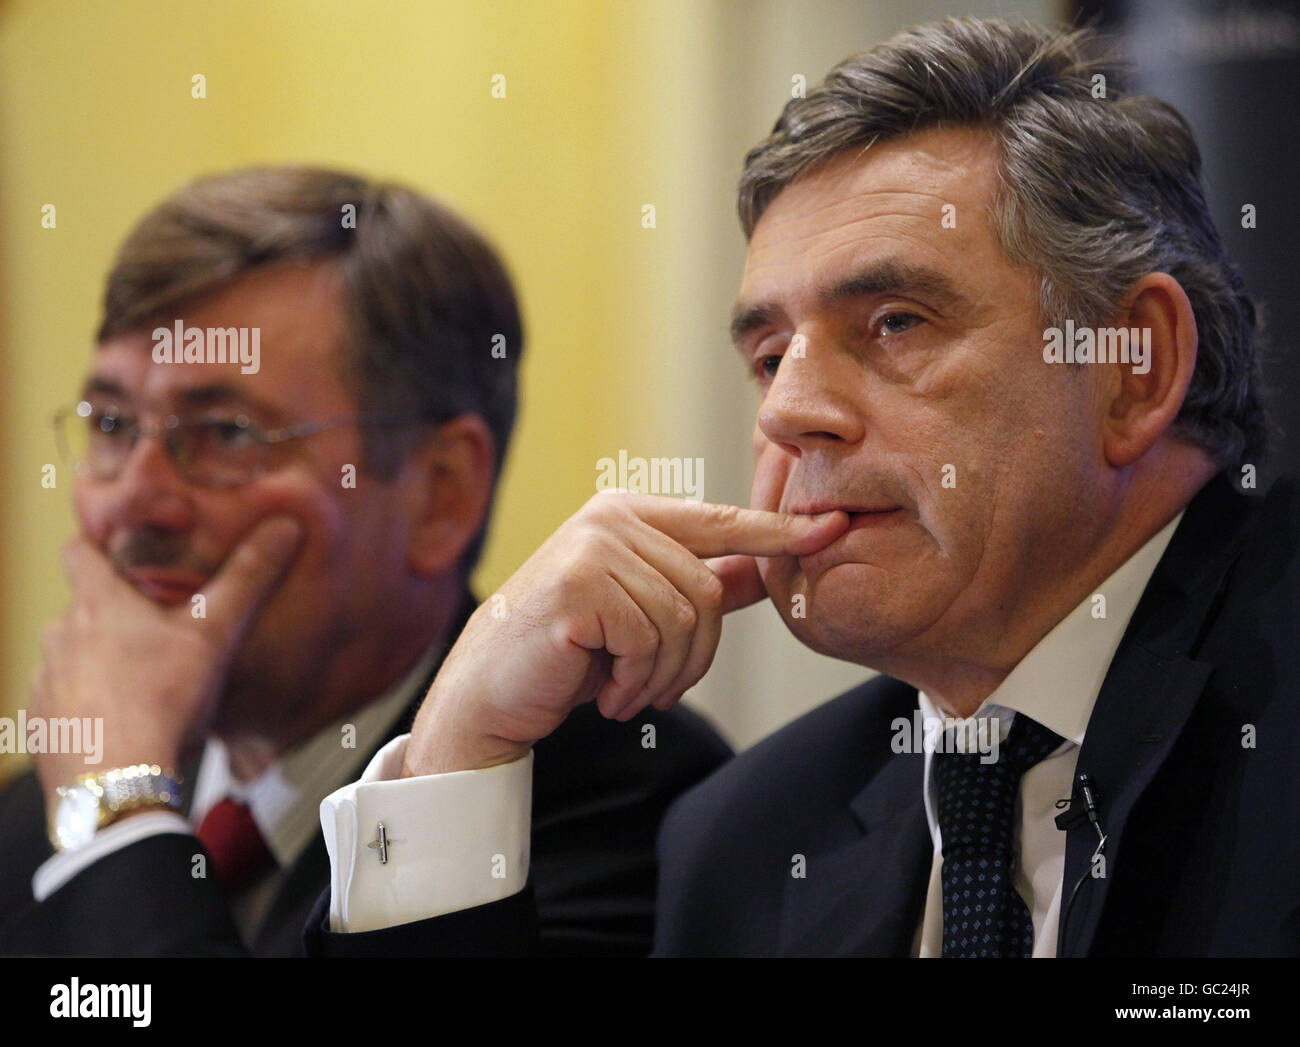 Prime Minister Gordon Brown and Defence Secretary Bob Ainsworth attend a question and answer session following a keynote speech on Afghanistan at the International Institute for Strategic Studies in central London. Stock Photo